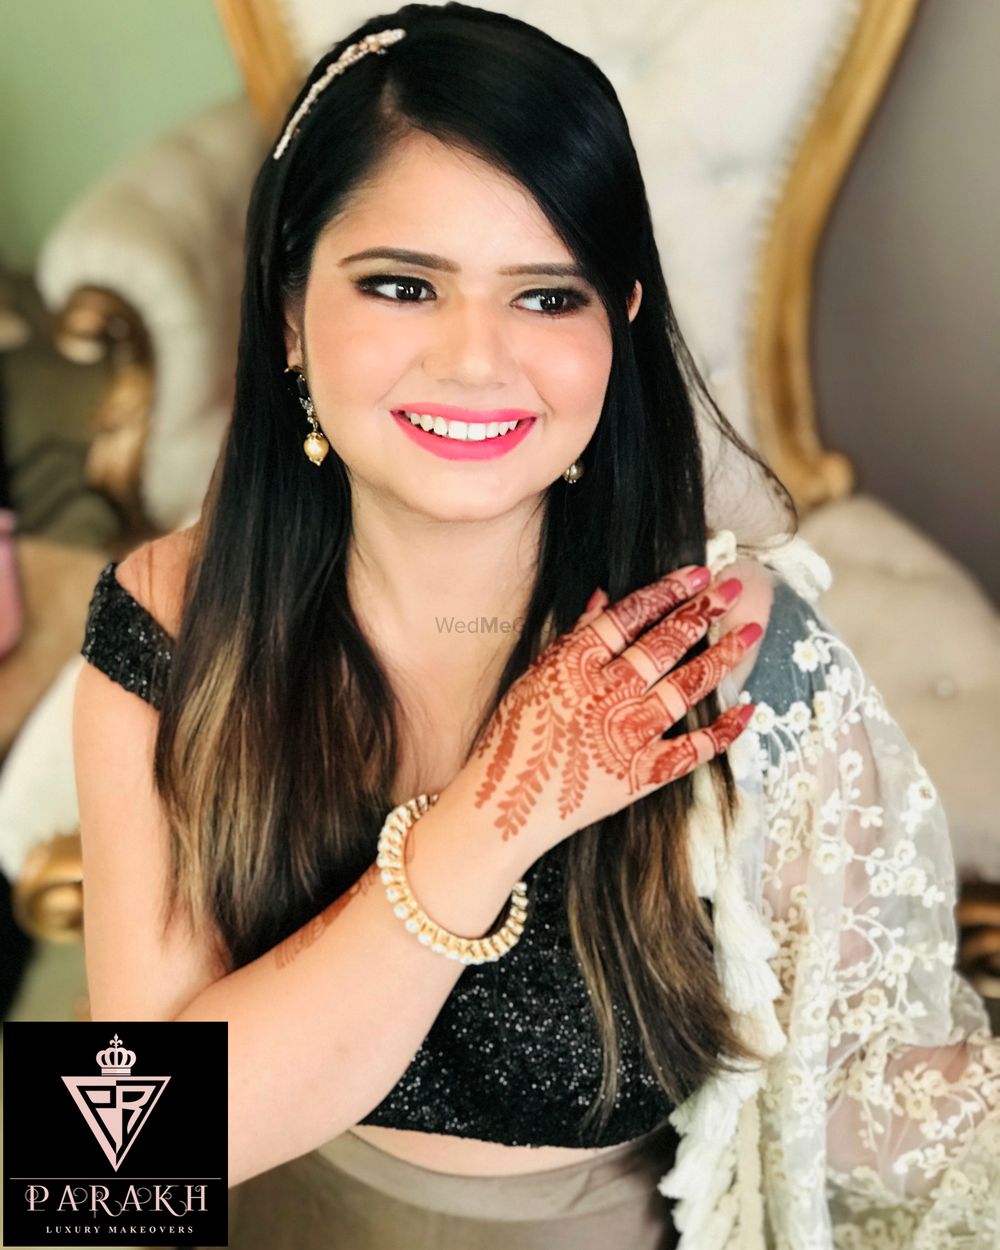 Photo By Parakh Luxury Makeovers - Bridal Makeup